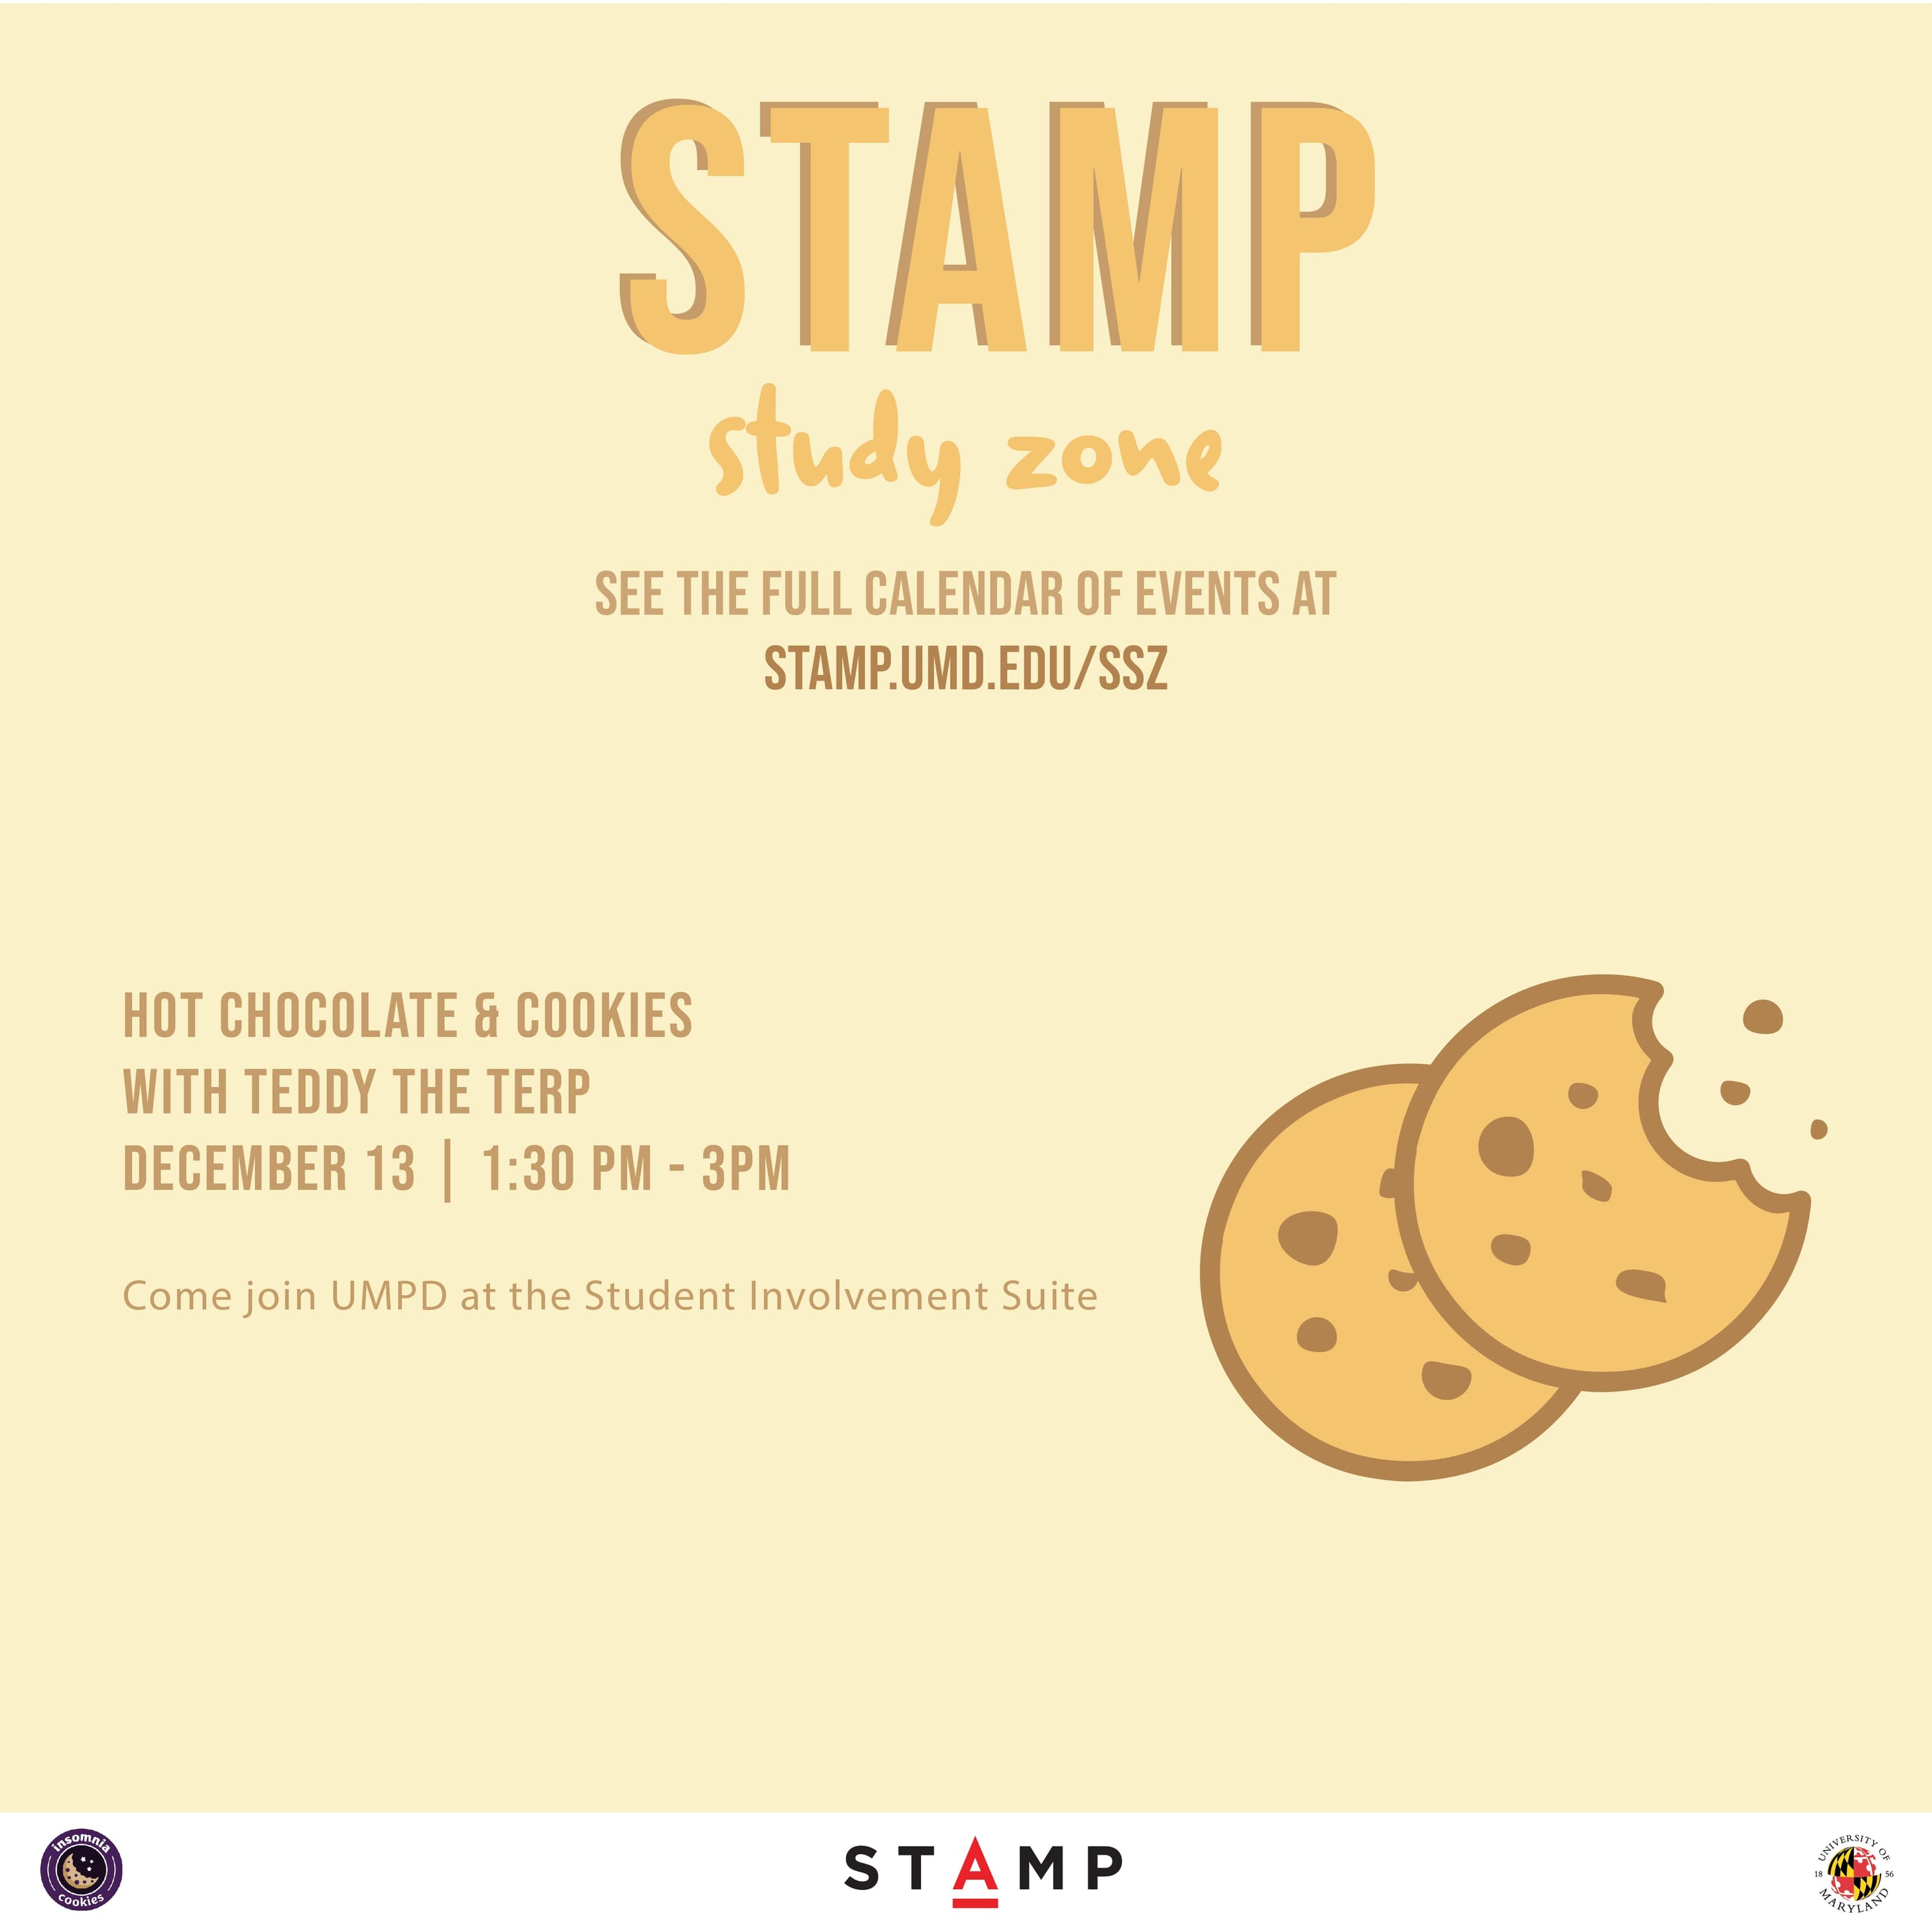 Image for Hot Chocolate & Cookies with Teddy the Terp